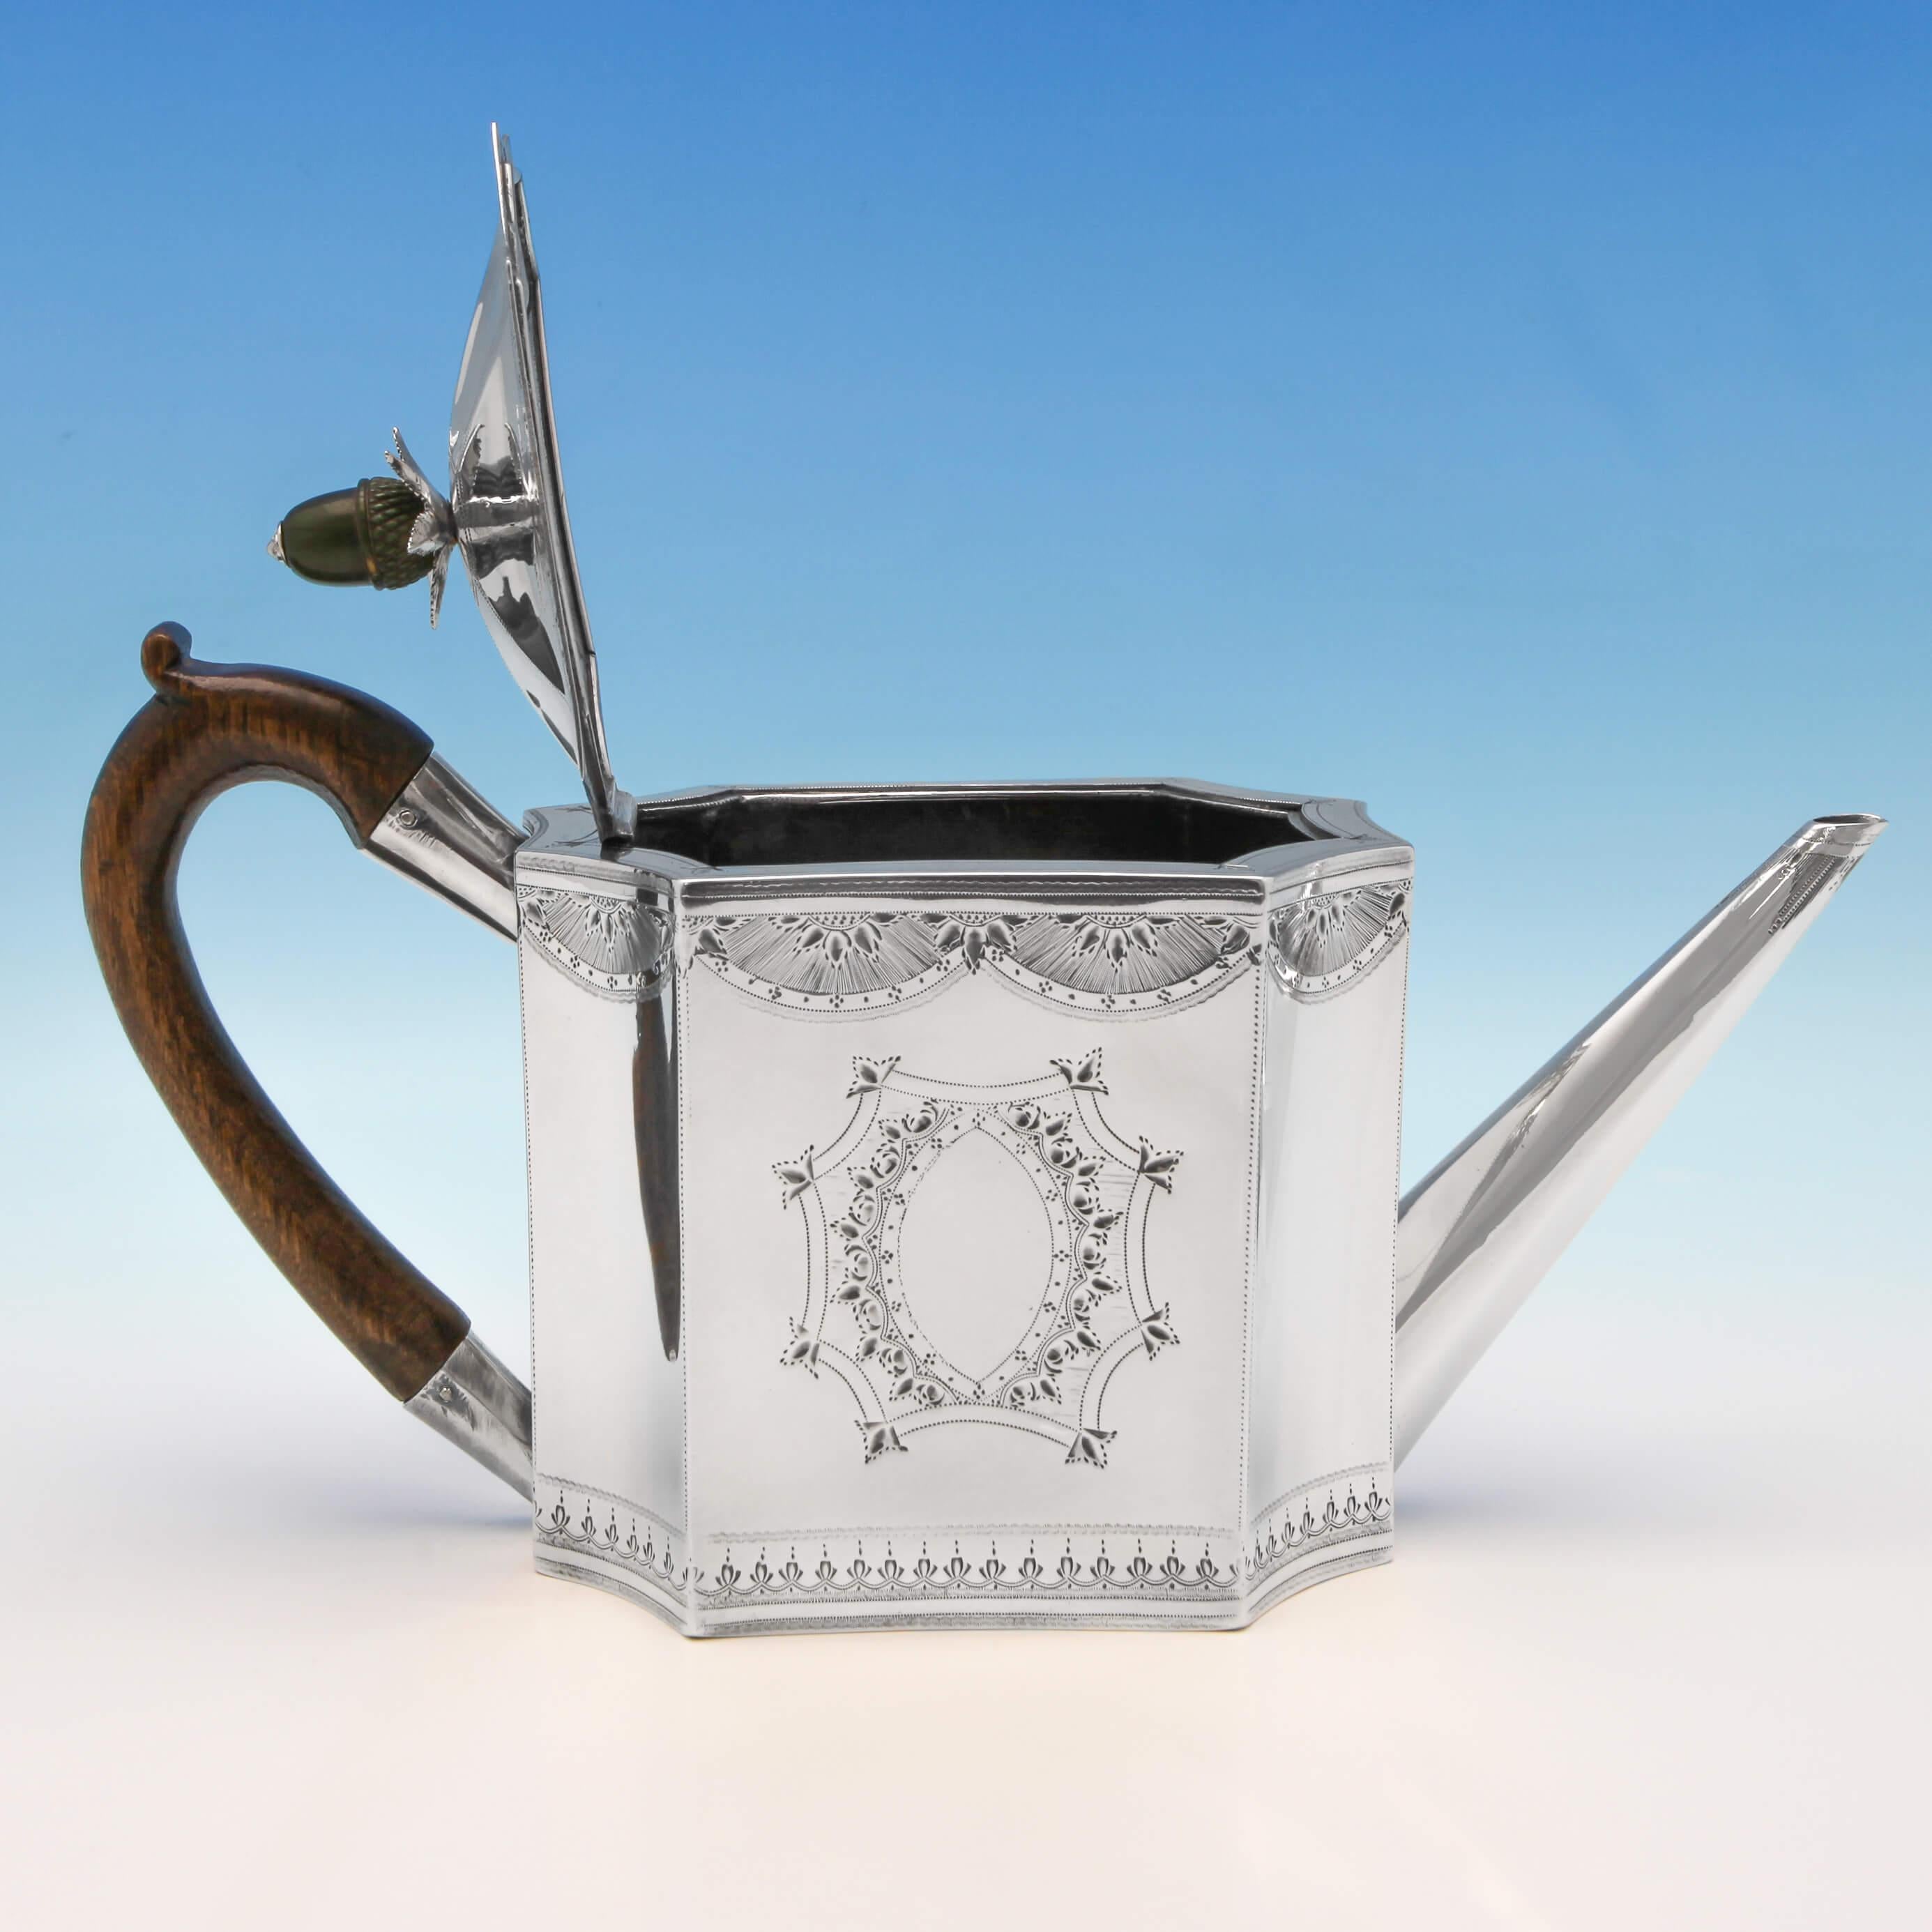 Hallmarked in London in 1790 by Charles Hougham, this exceptional, George III, antique sterling silver teapot, has an unusual shape and wonderful bright cut engraved decoration throughout, with a fruitwood handle and an ivory acorn shaped finial.